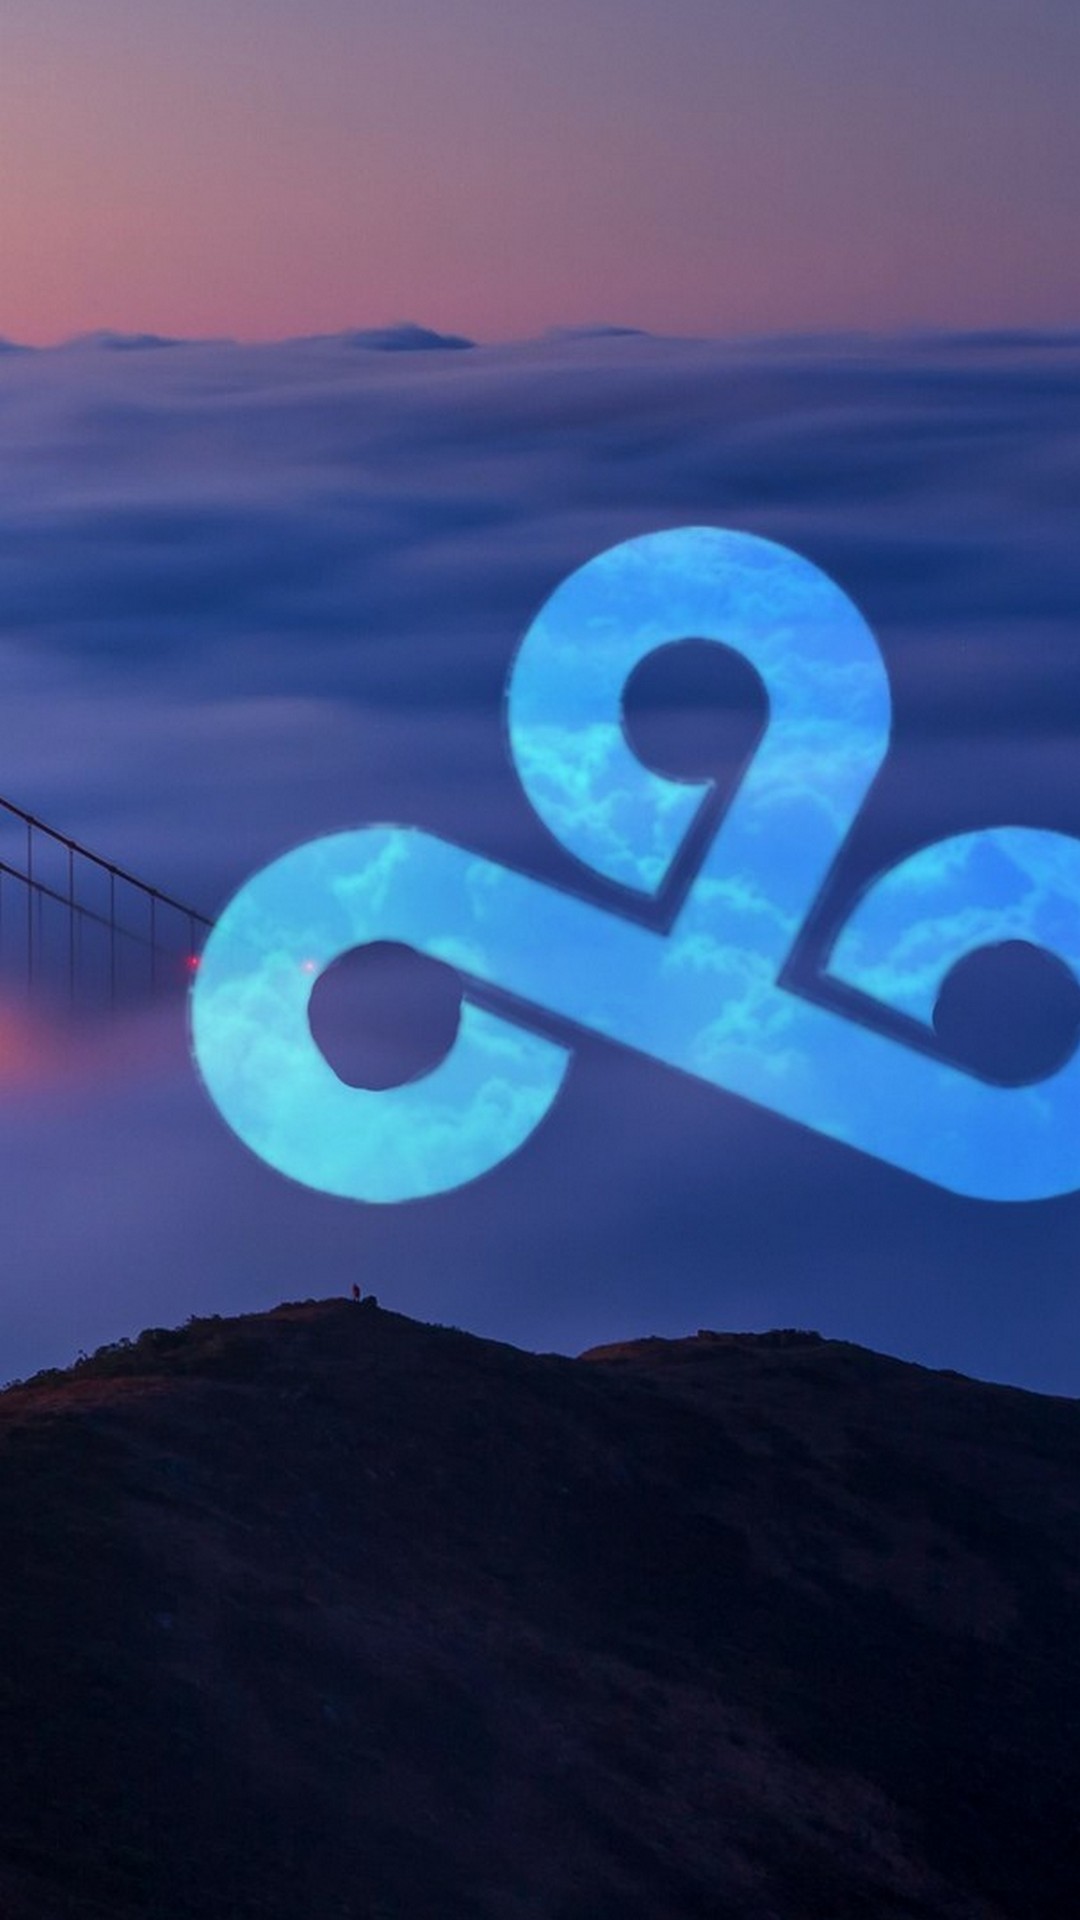 Cloud 9 Games Wallpaper iPhone with HD Resolution 1080X1920